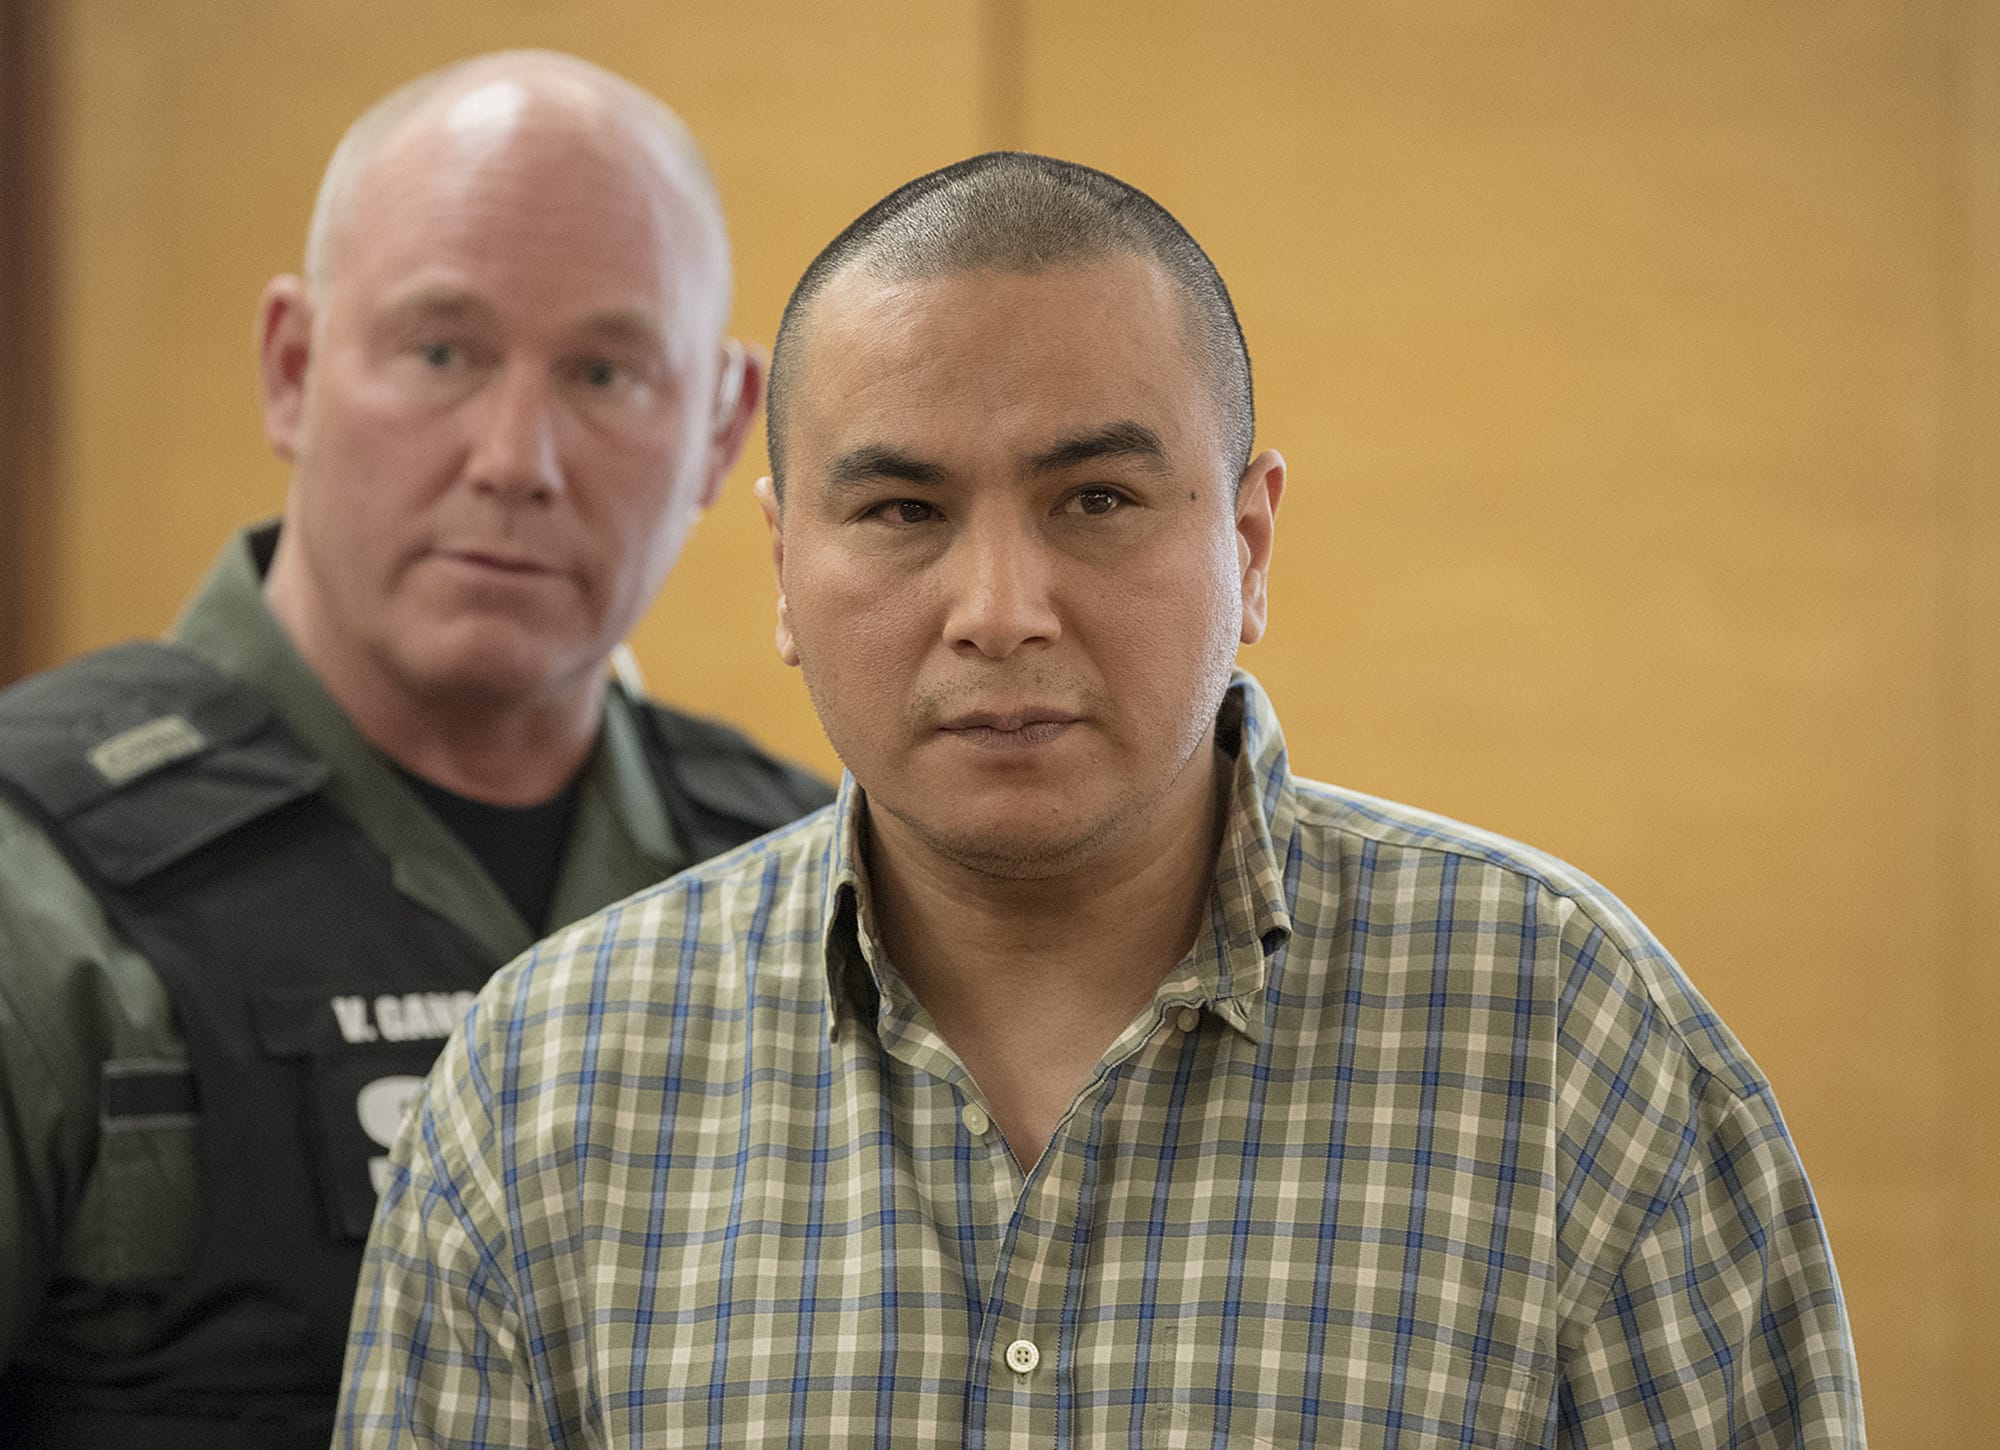 Ricardo Gutierrez Jr., in plaid, prepares to exit the courtroom after being found guilty of first-degree murder in the beating death of Jose "Pepe" Castillo-Cisneros, 3, with an aggravating factor that Pepe was a particularly vulnerable victim, in Clark County Superior Court on Thursday morning, Feb. 1, 2018. Gutierrez was sentenced Tuesday to 45 years in prison.